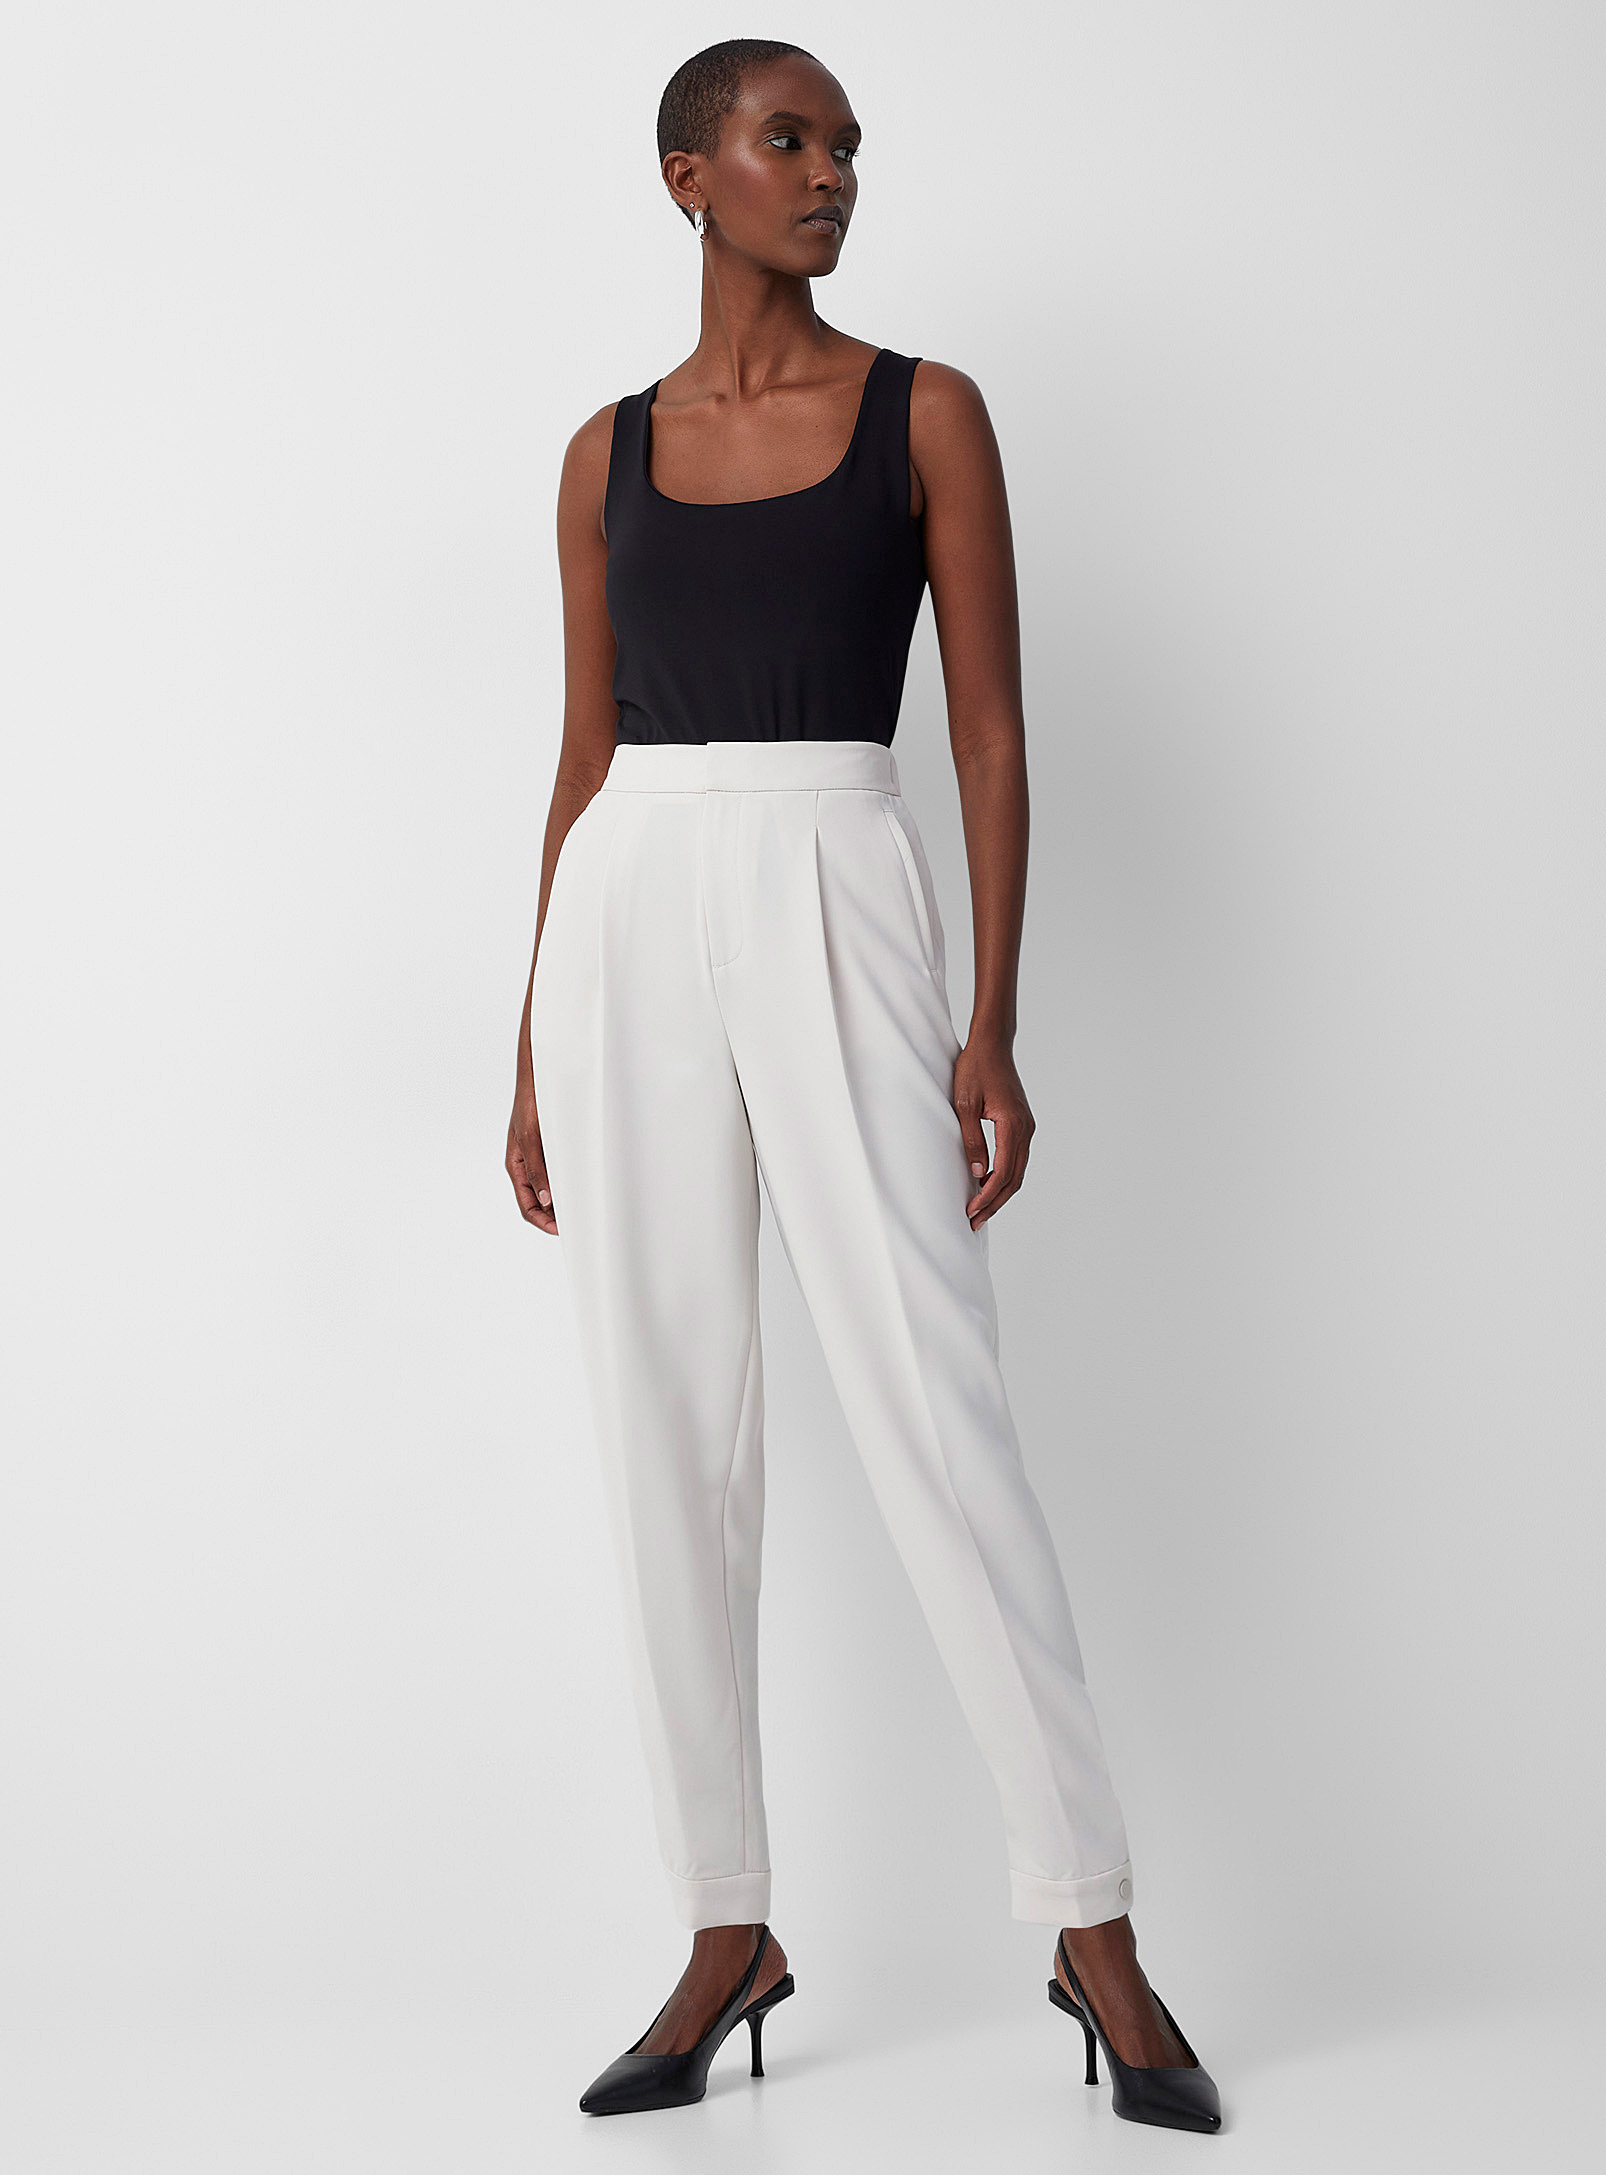 Contemporaine Flowing Balloon Pant In Ivory White